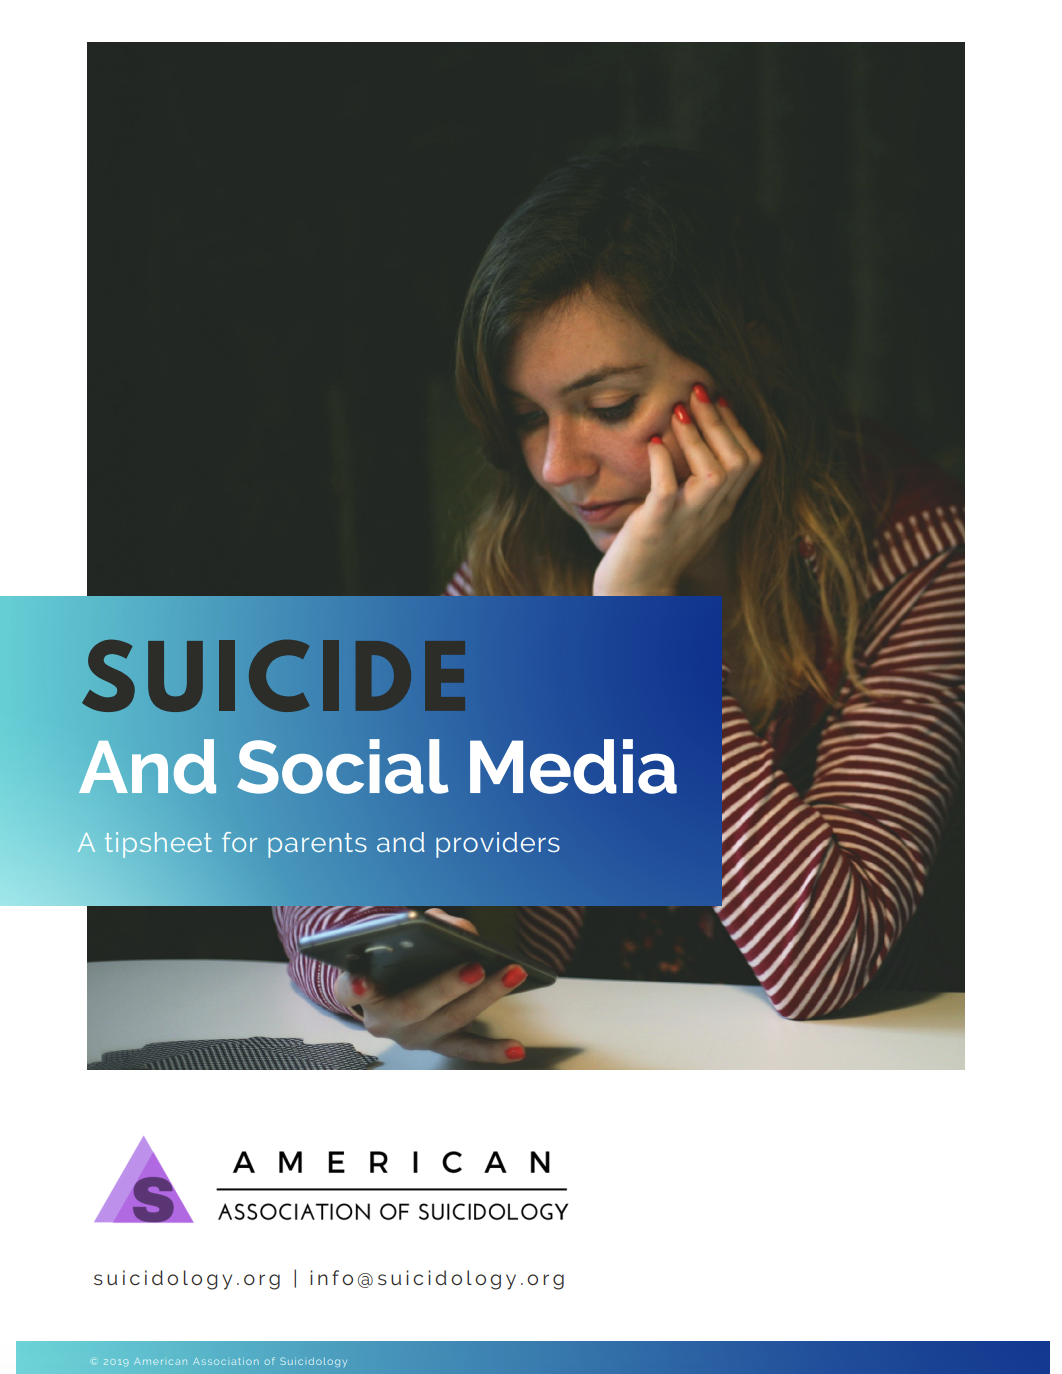 Suicide and Social Media